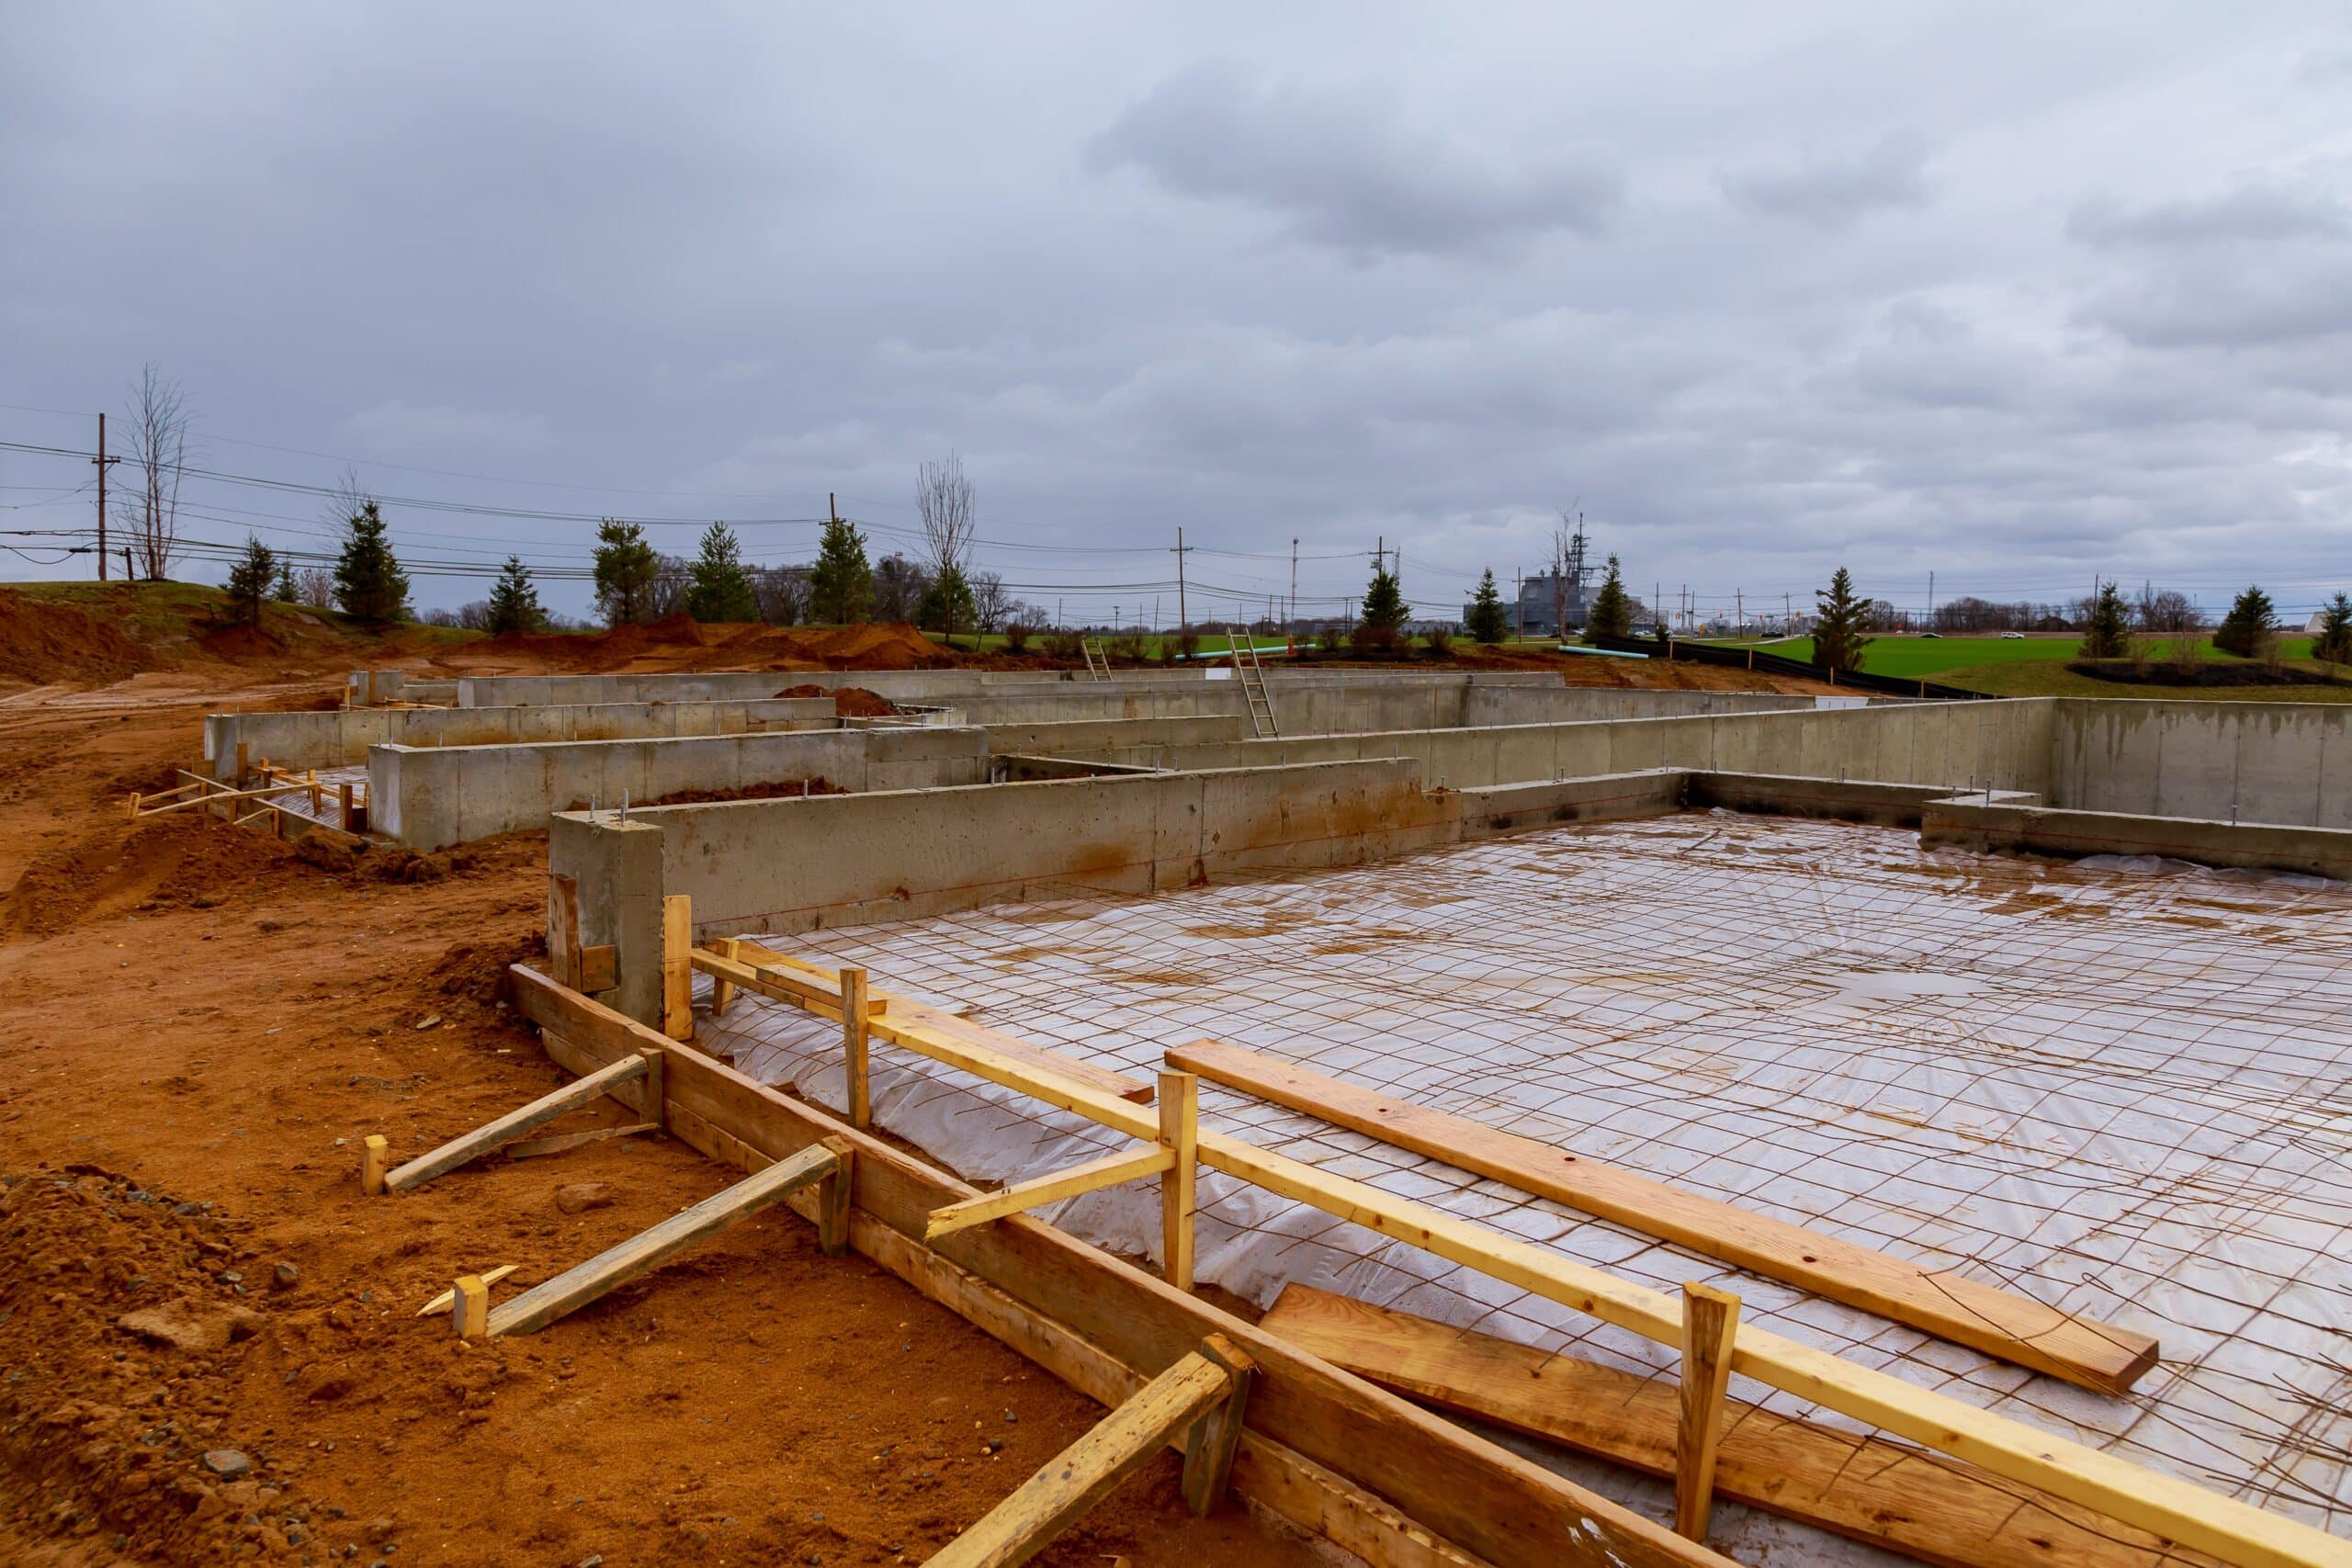 A construction site showing the foundation of new homes in progress.